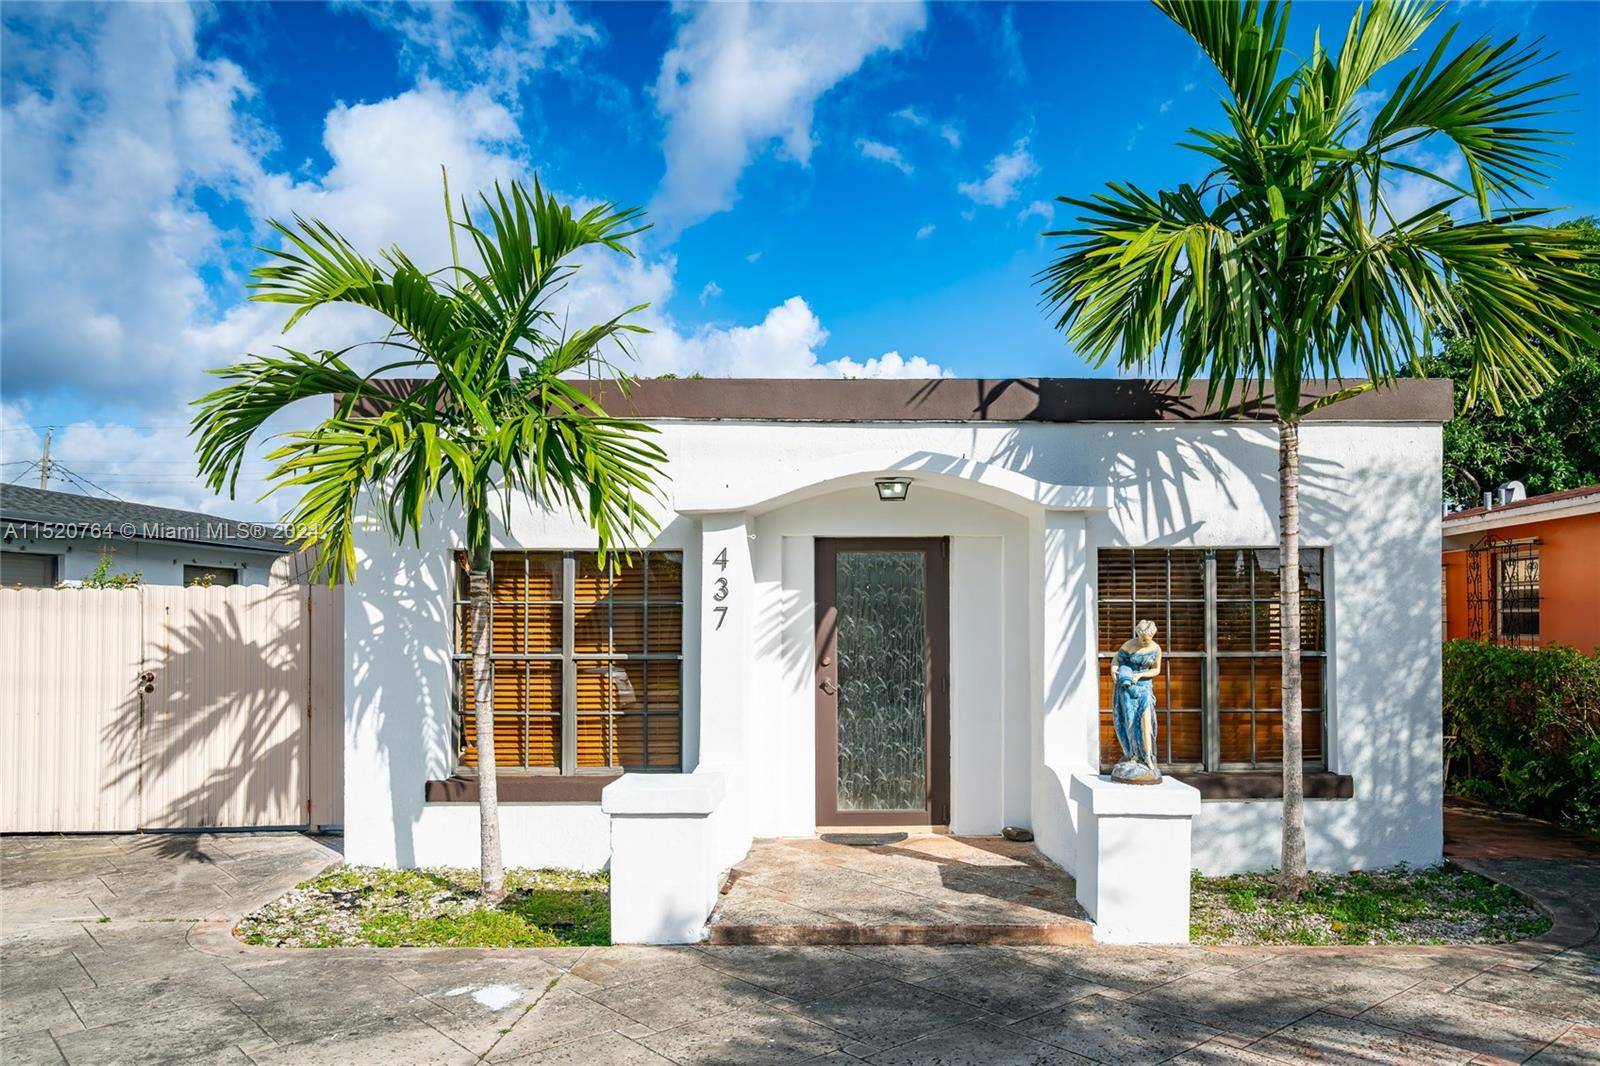 Great opportunity to own a Single Family Home with 4 bedrooms and 3 Bathrooms, Centrally located in a quiet neighborhood in Hialeah.